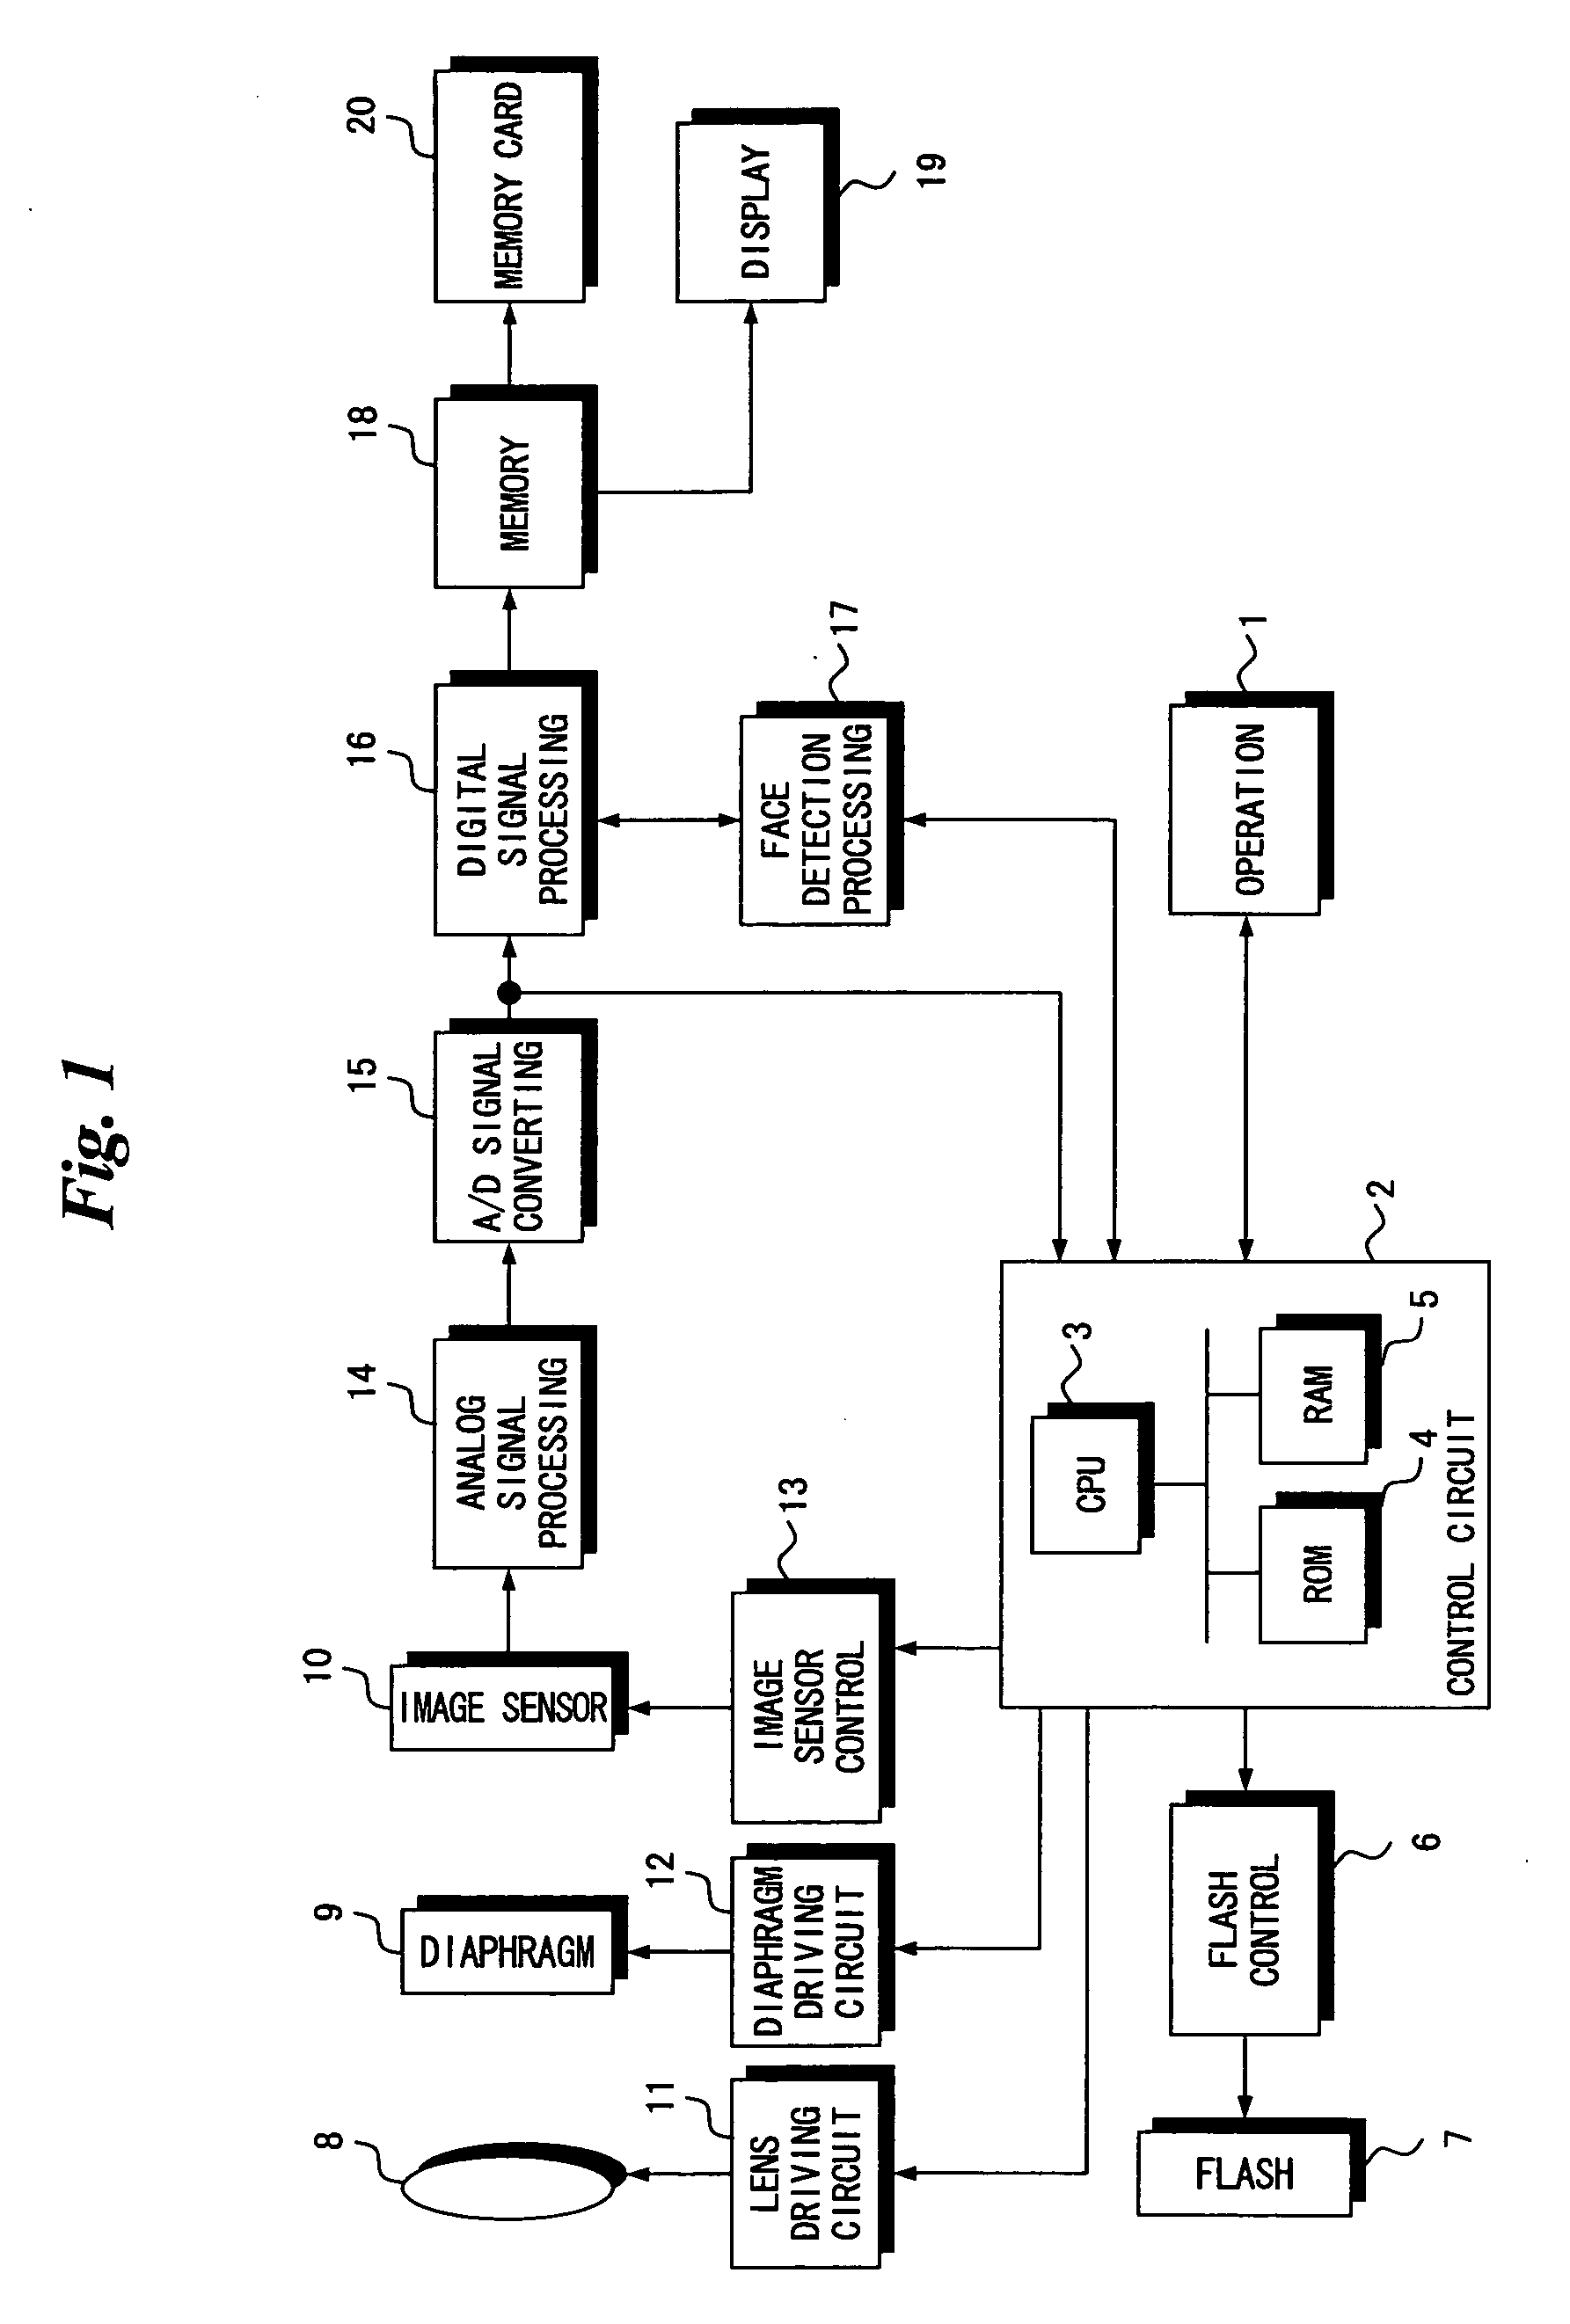 Target-image position detecting apparatus, method and program for controlling said apparatus